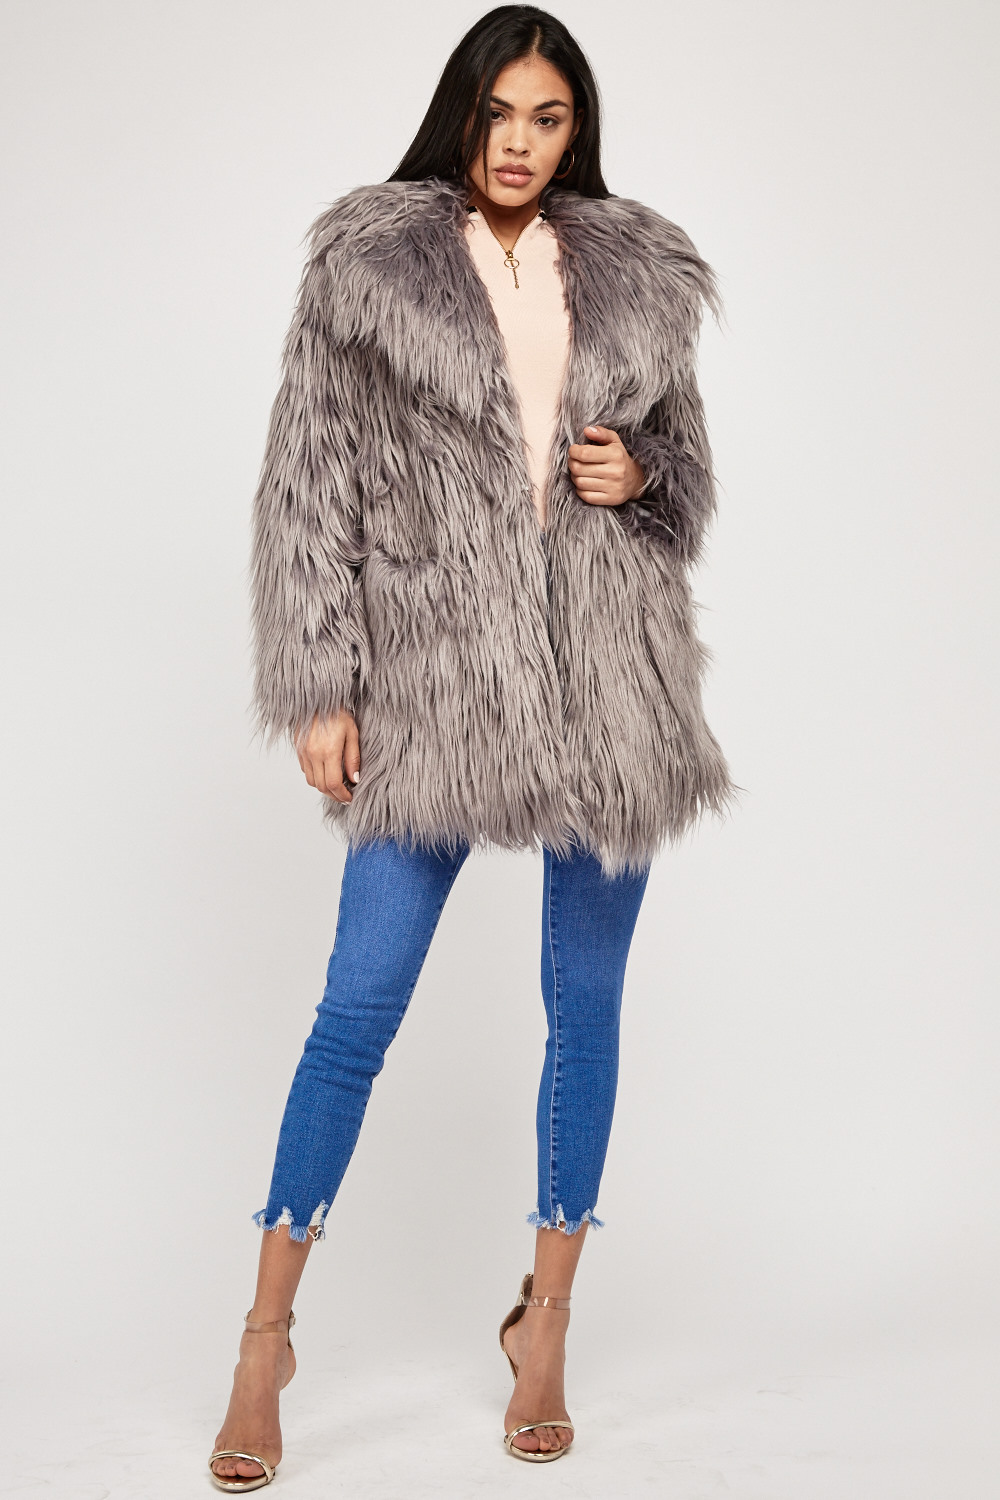 Fluffy Faux Fur Overlay Coat - Just $21